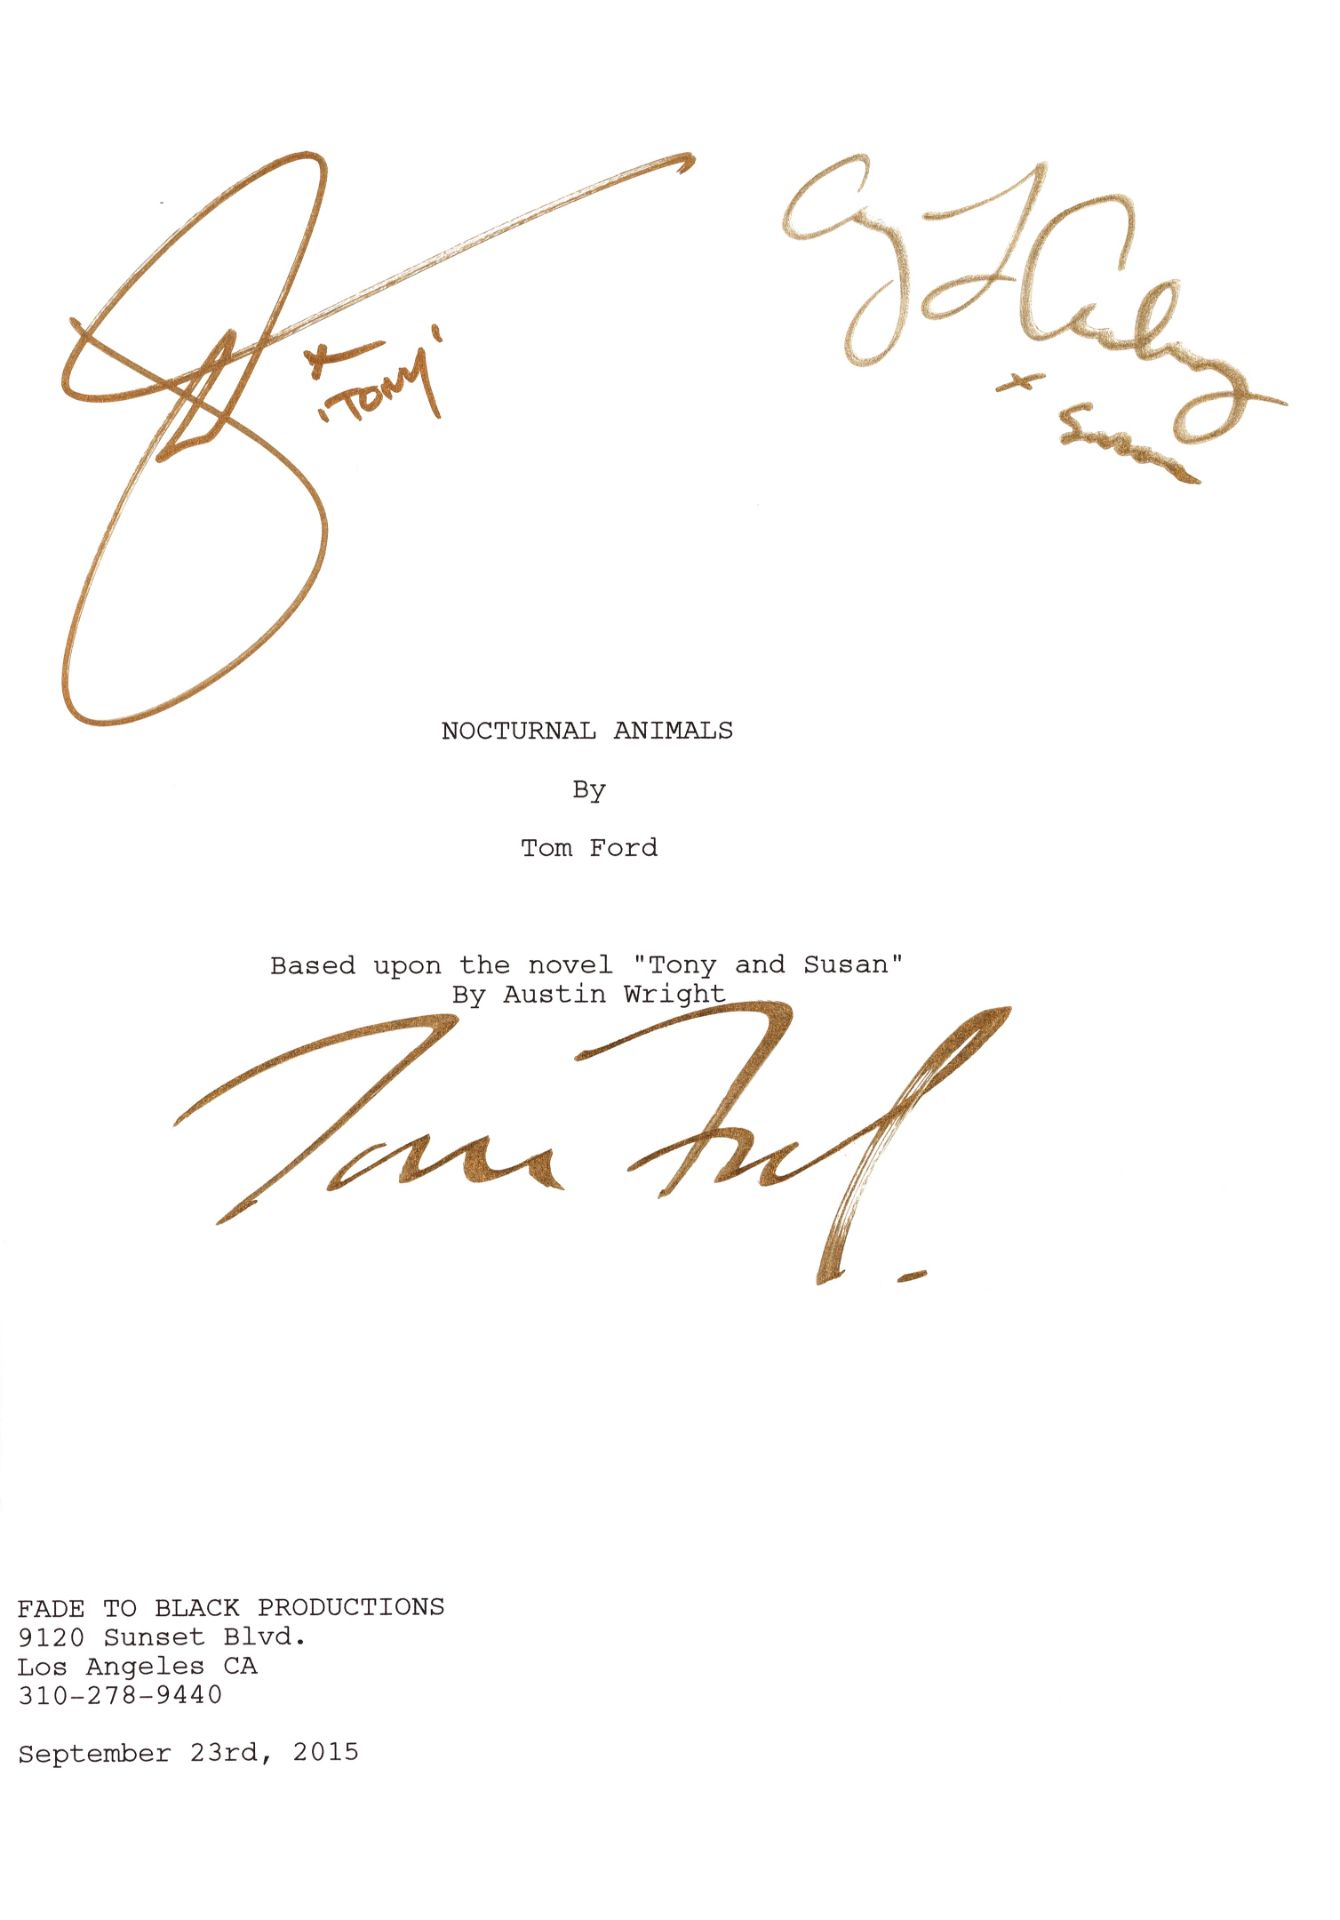 Nocturnal Animals: A signed script, Fade To Black Productions, 2016,